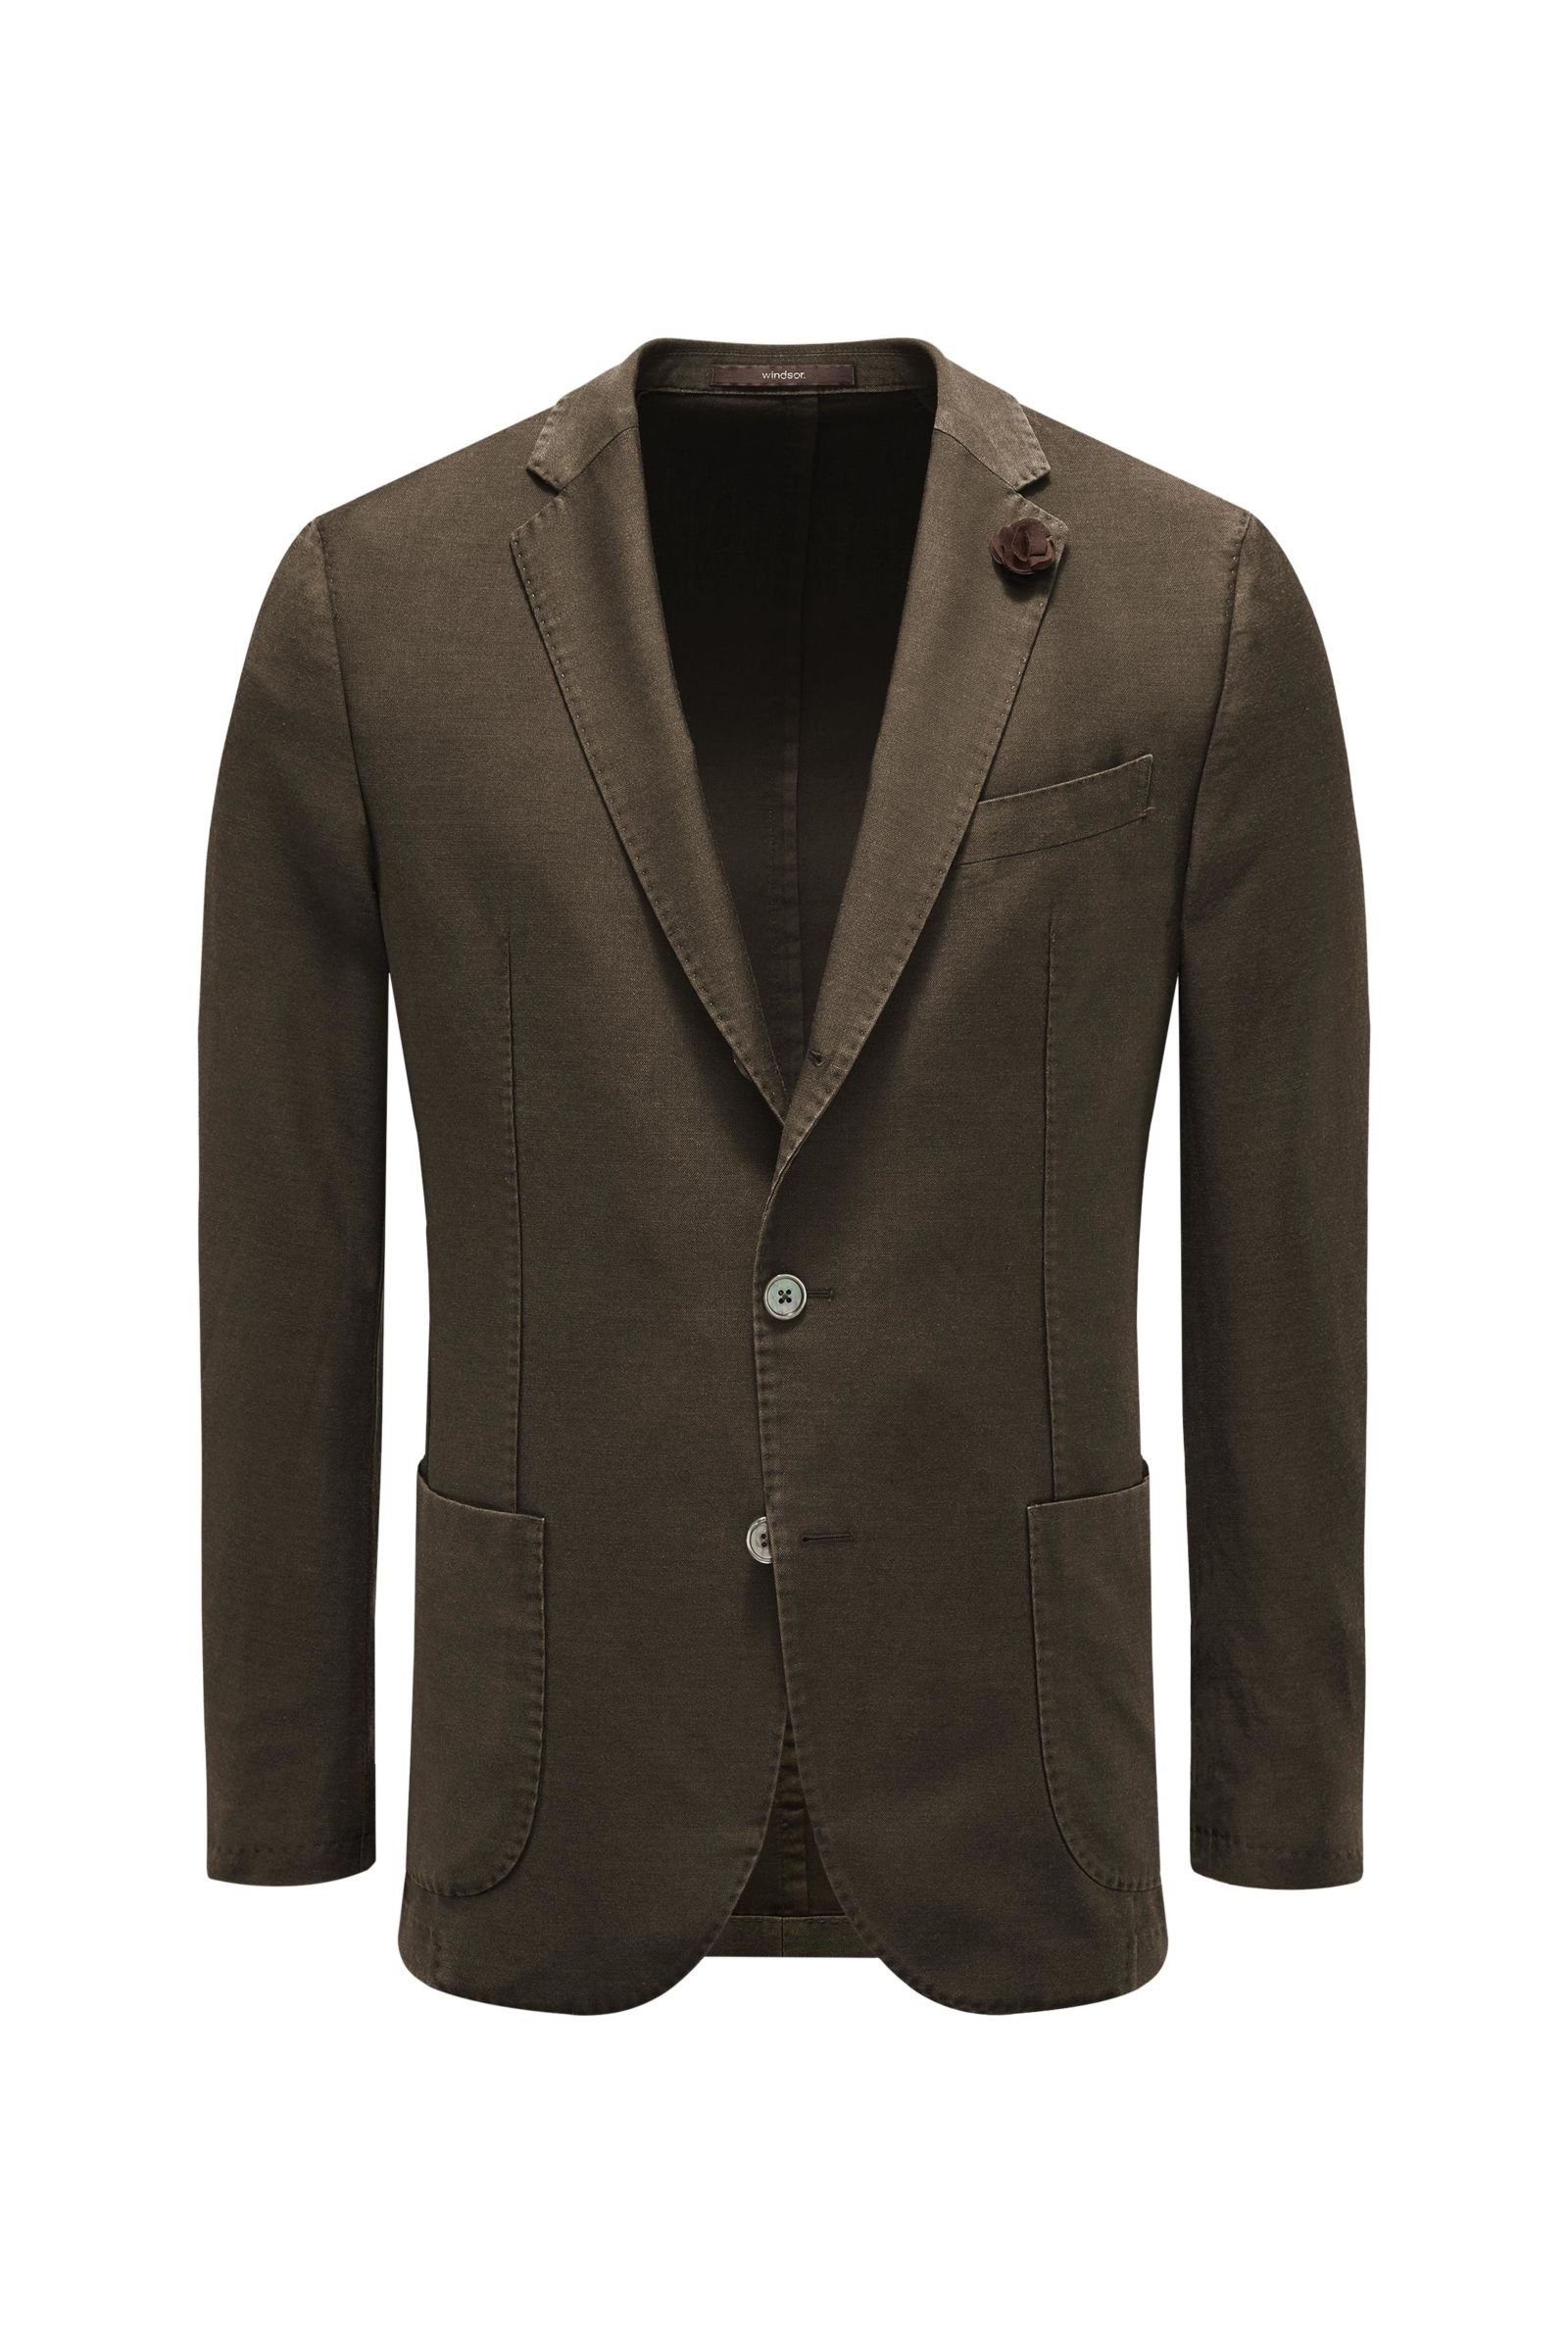 Smart-casual jacket 'Camicia' olive